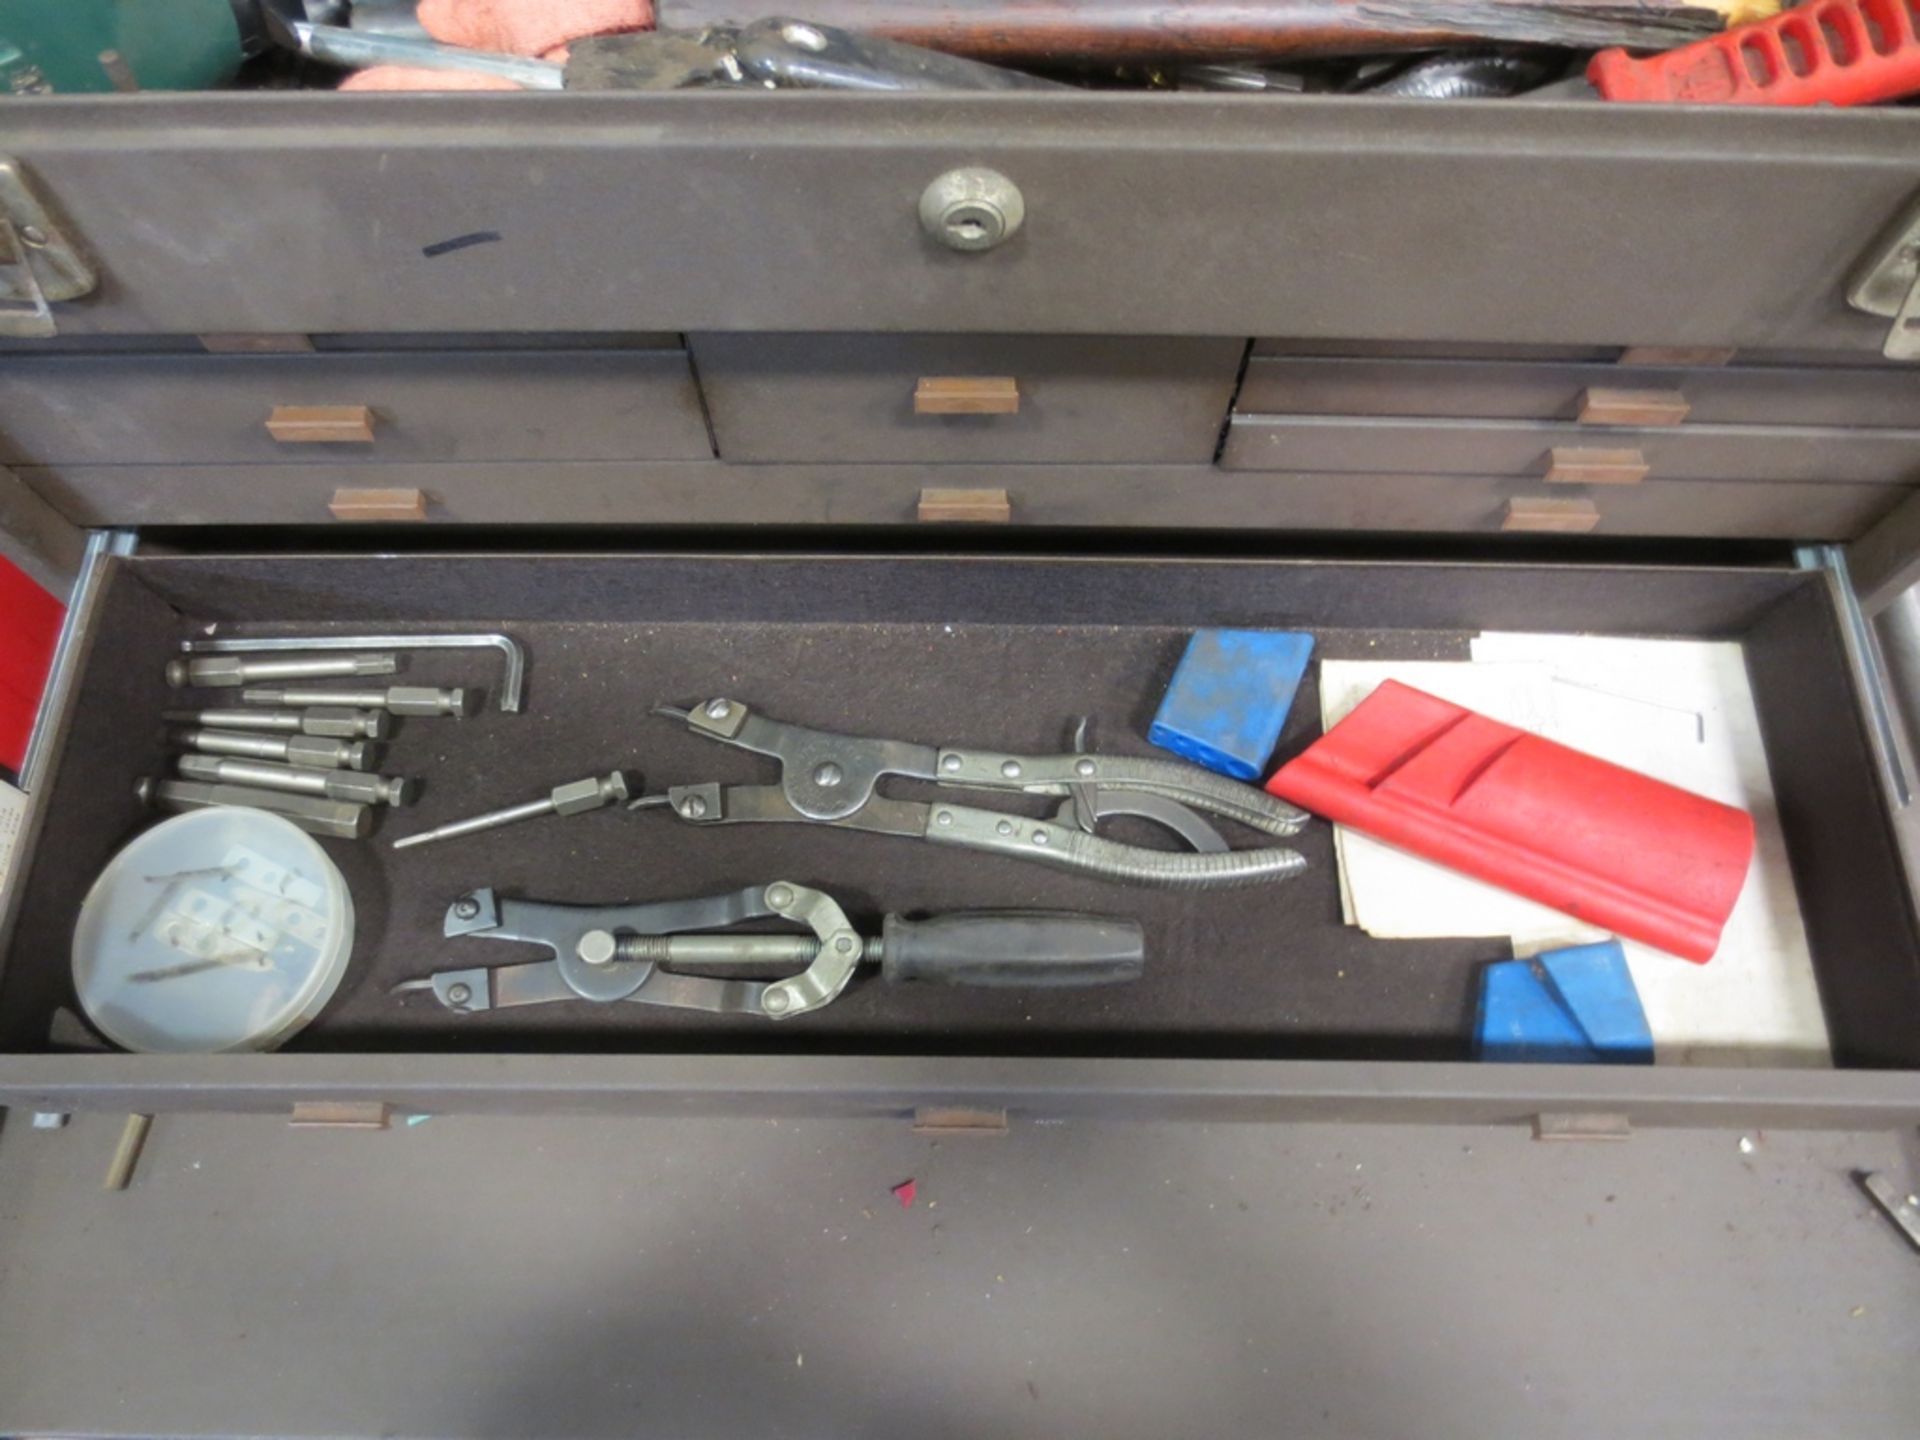 KENNEDY TOOL BOX WITH CONTENTS OF TOOLS, BOLTS, SCREWS, SEALS ETC. - Image 3 of 6